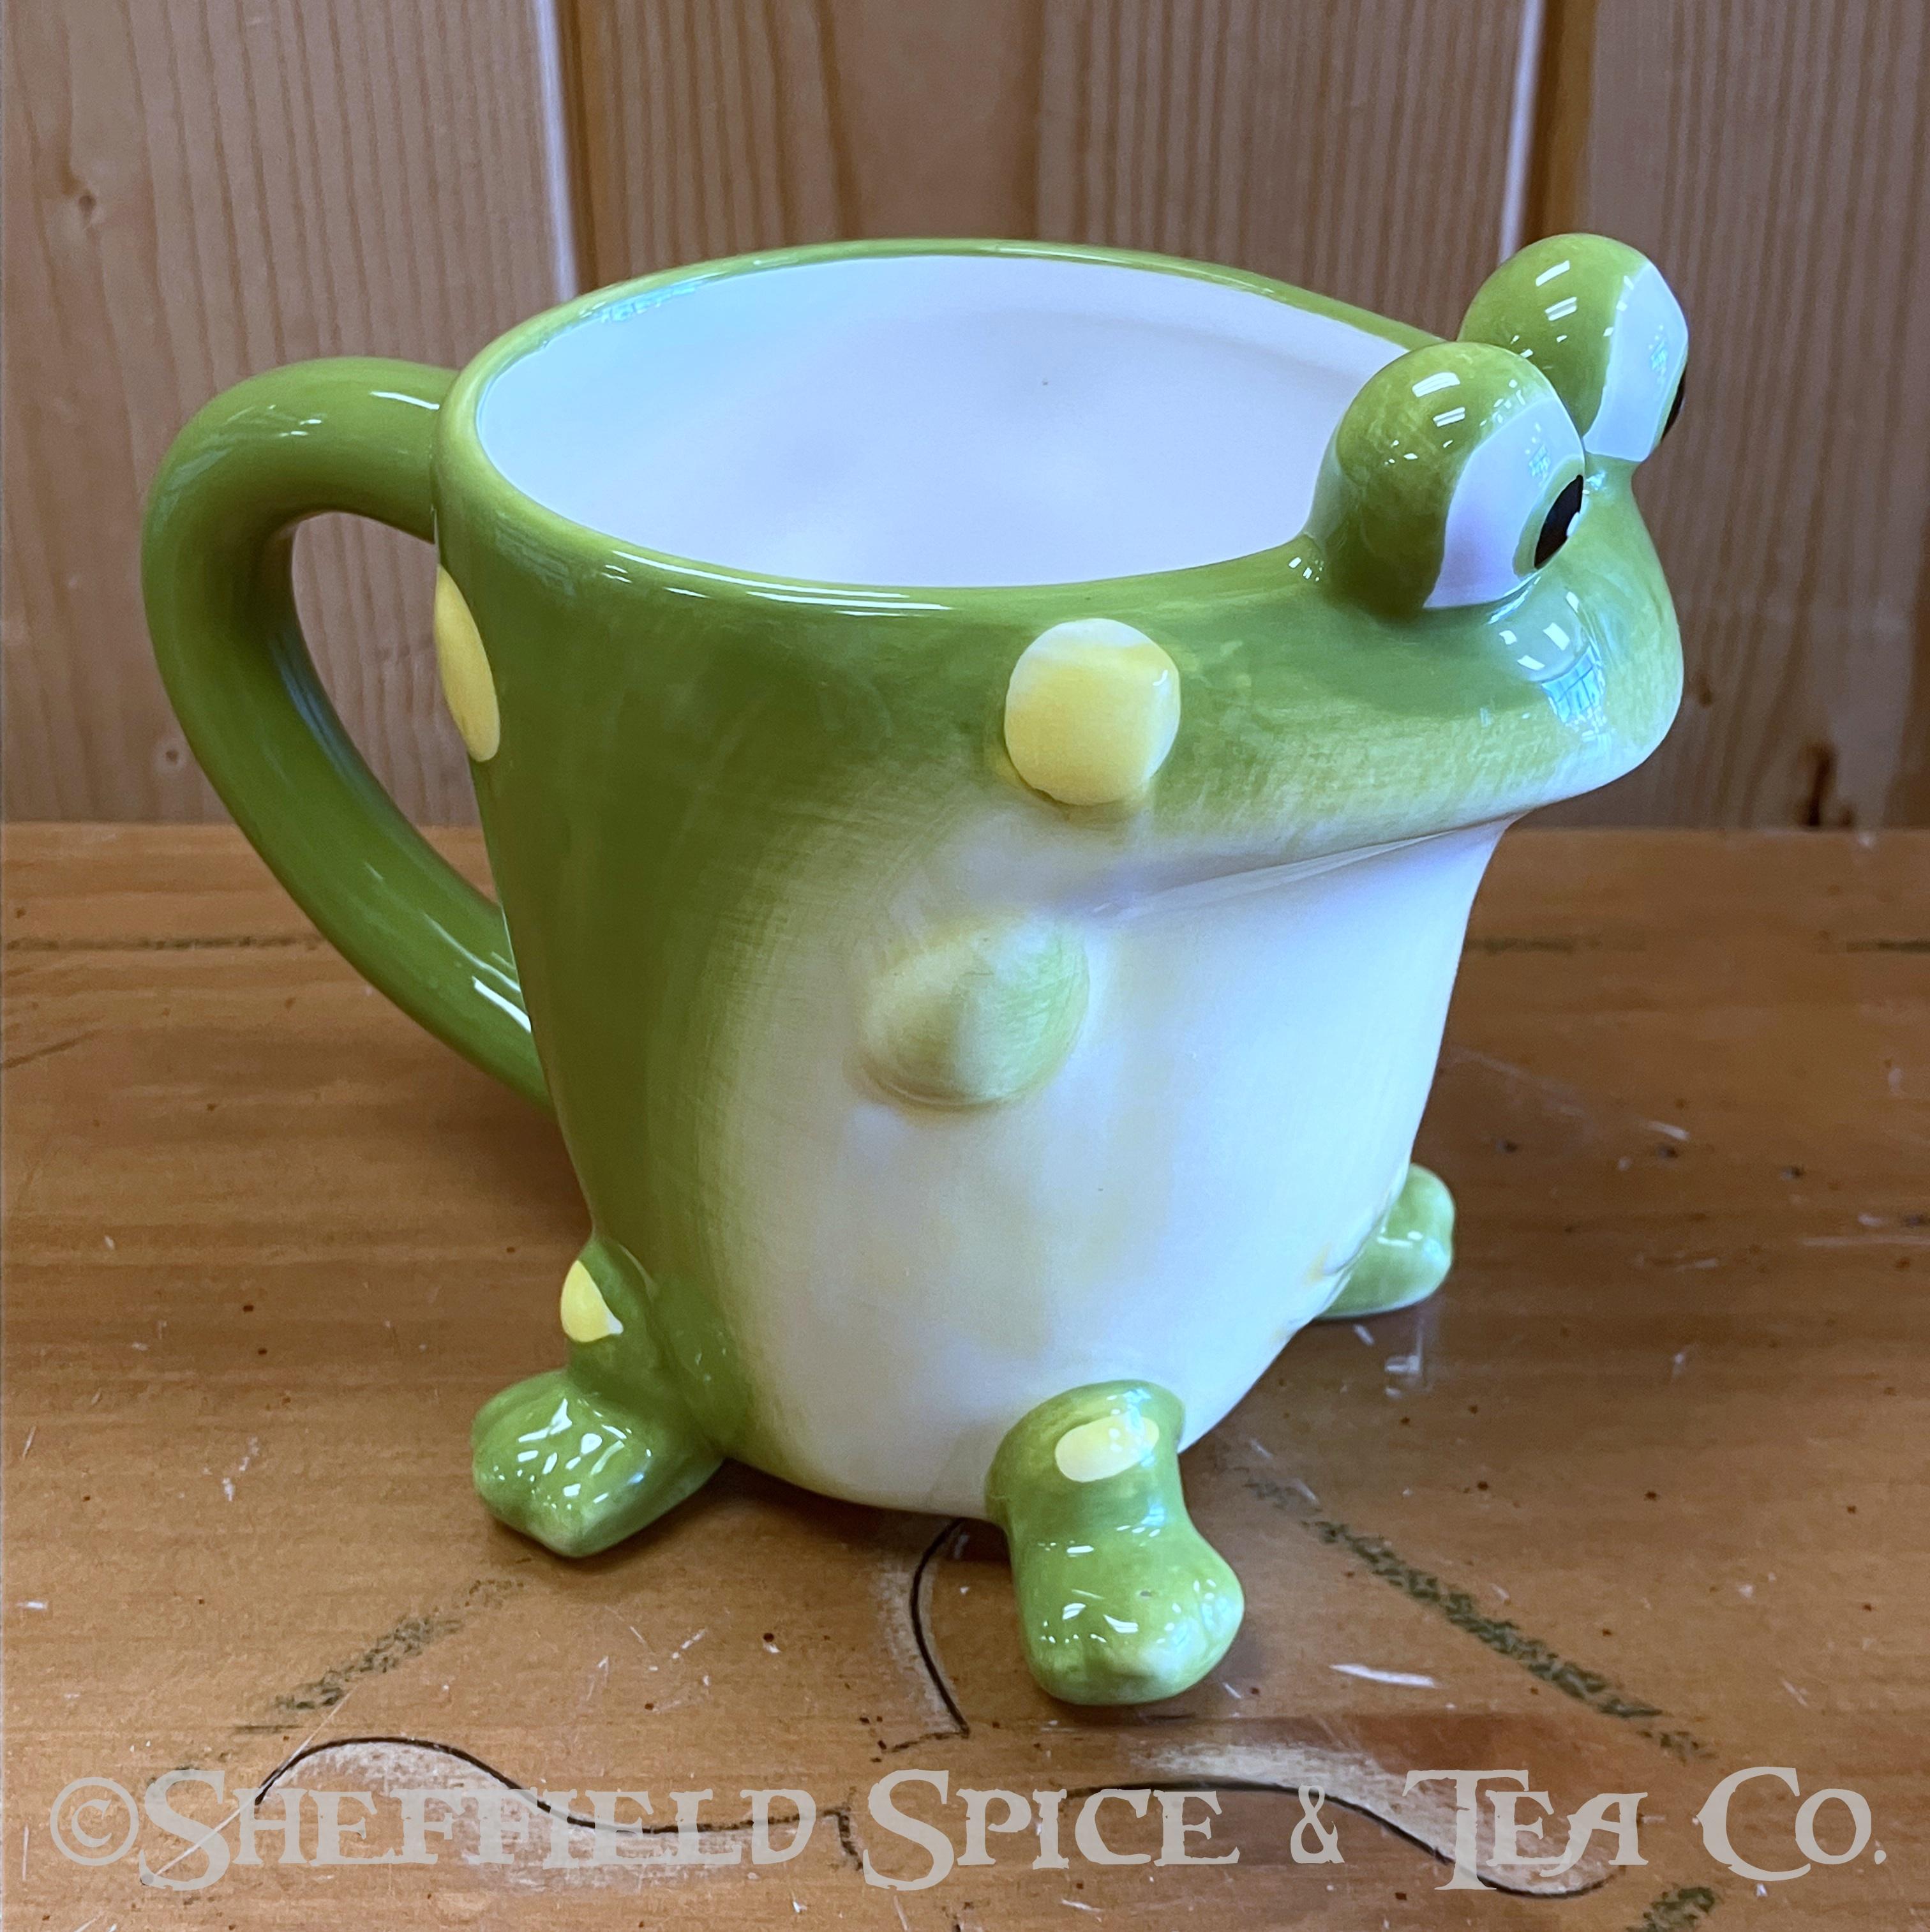 https://epjr3q9r9ms.exactdn.com/wp-content/uploads/2022/06/toby-the-toad-tea-cup-image1-scaled.jpg?strip=all&lossy=1&ssl=1